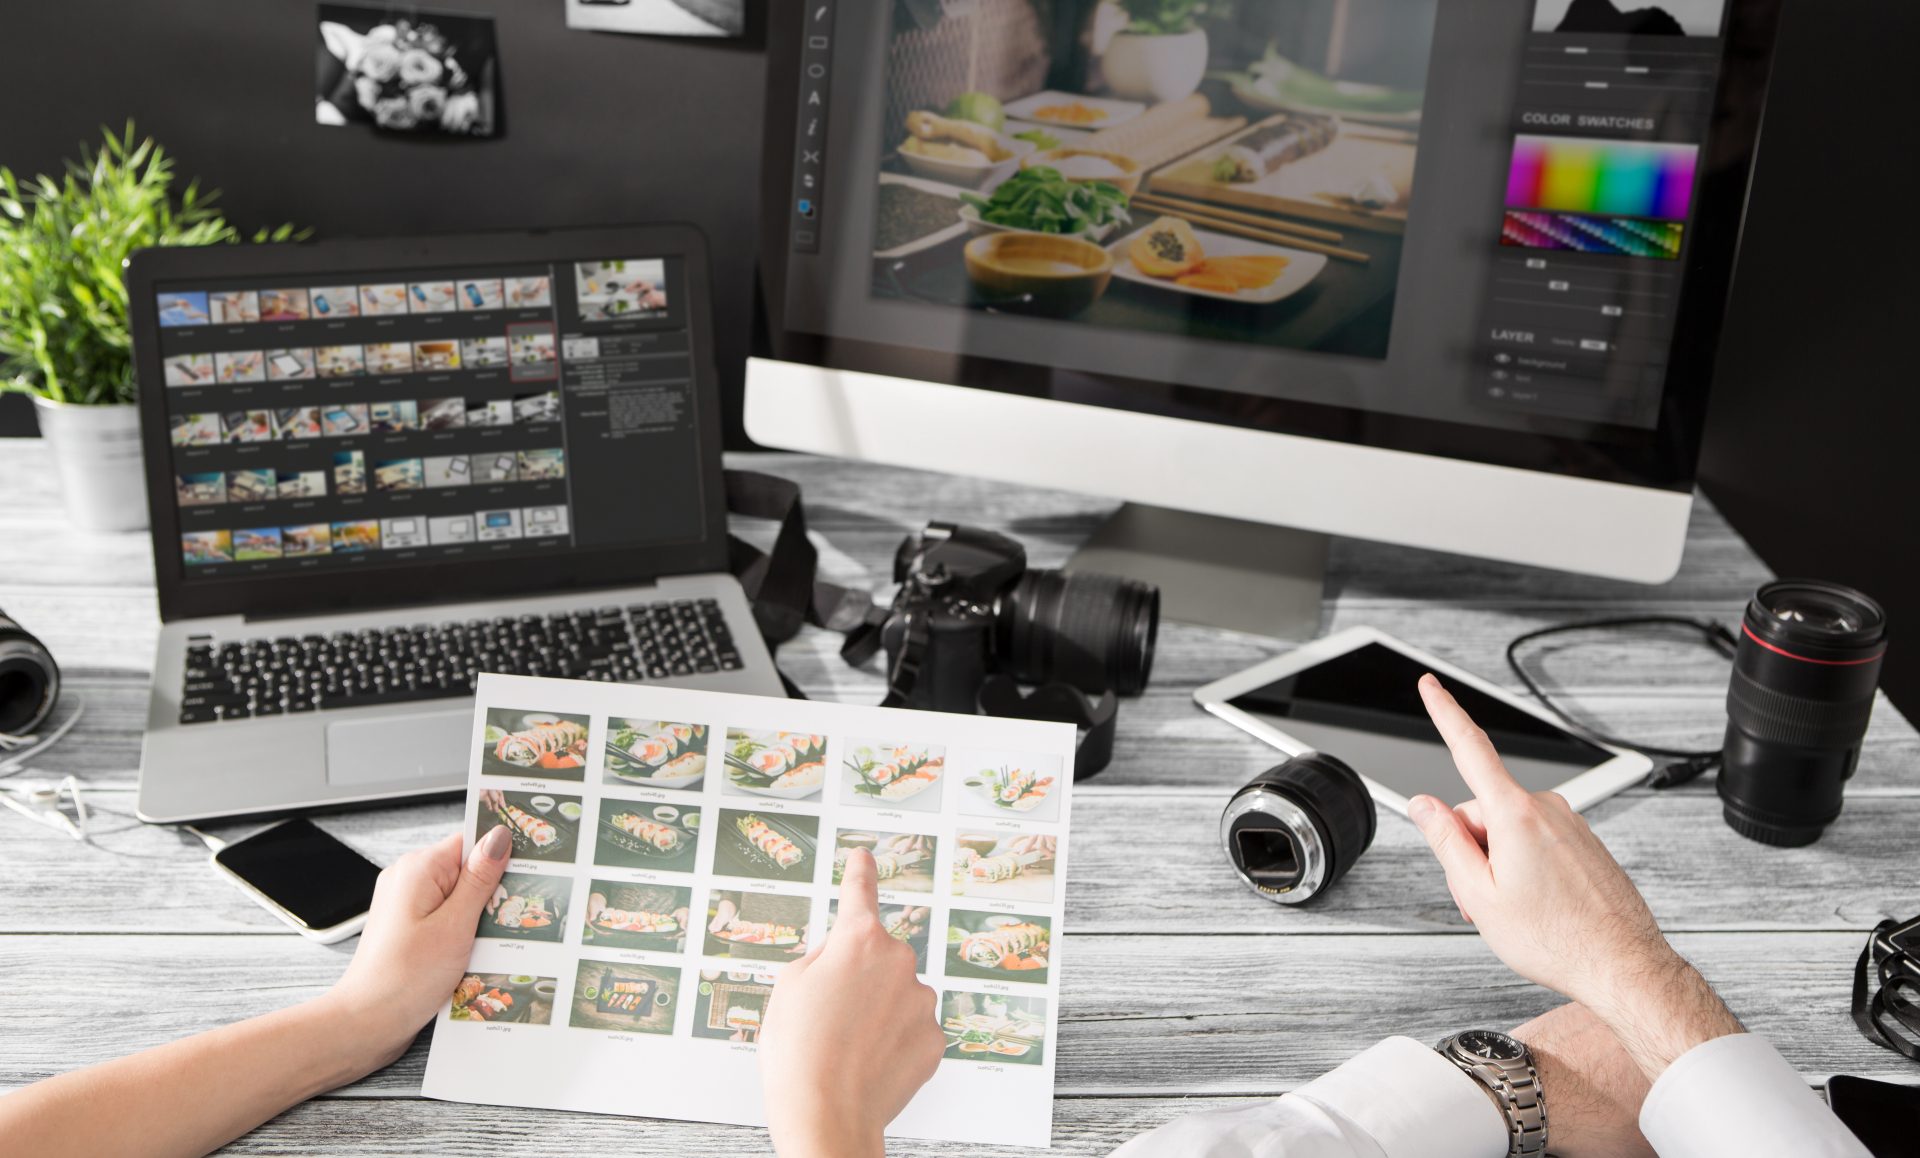 Take Your Website to the Next Level With Original Photo and Video